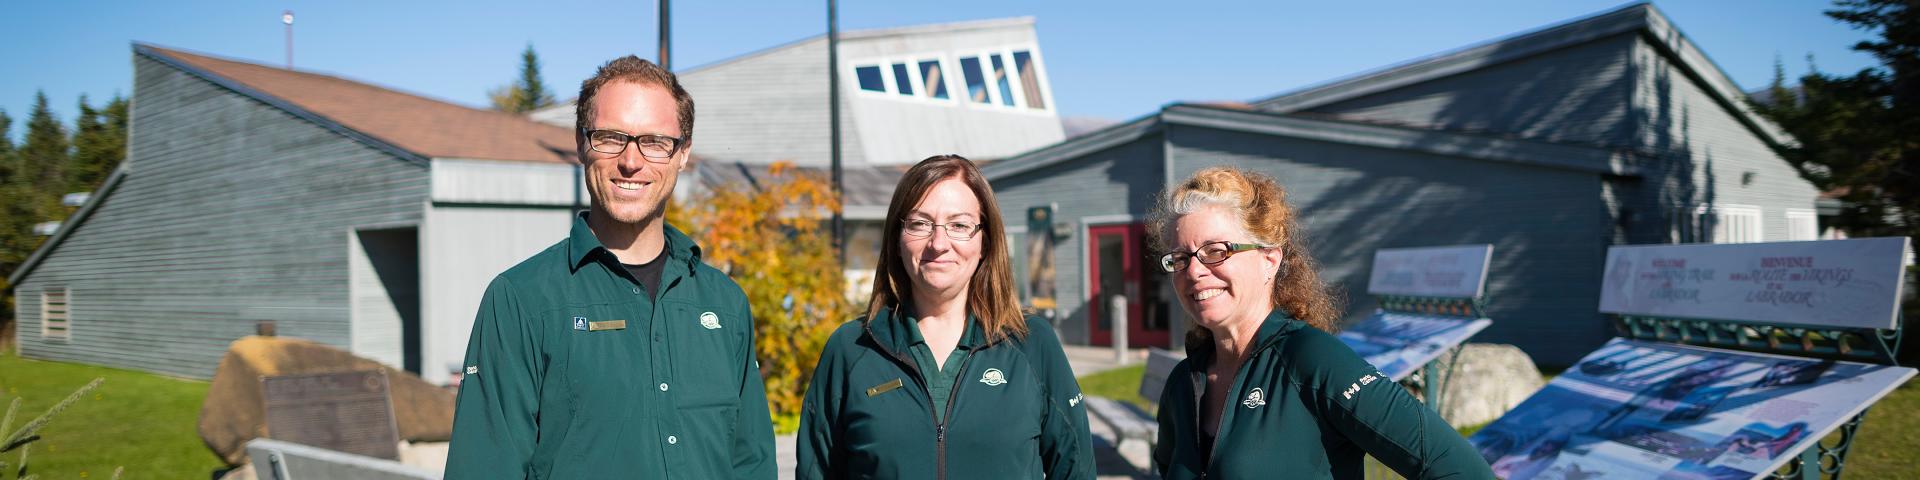 Parks Canada staff standing outside the visitor centre.